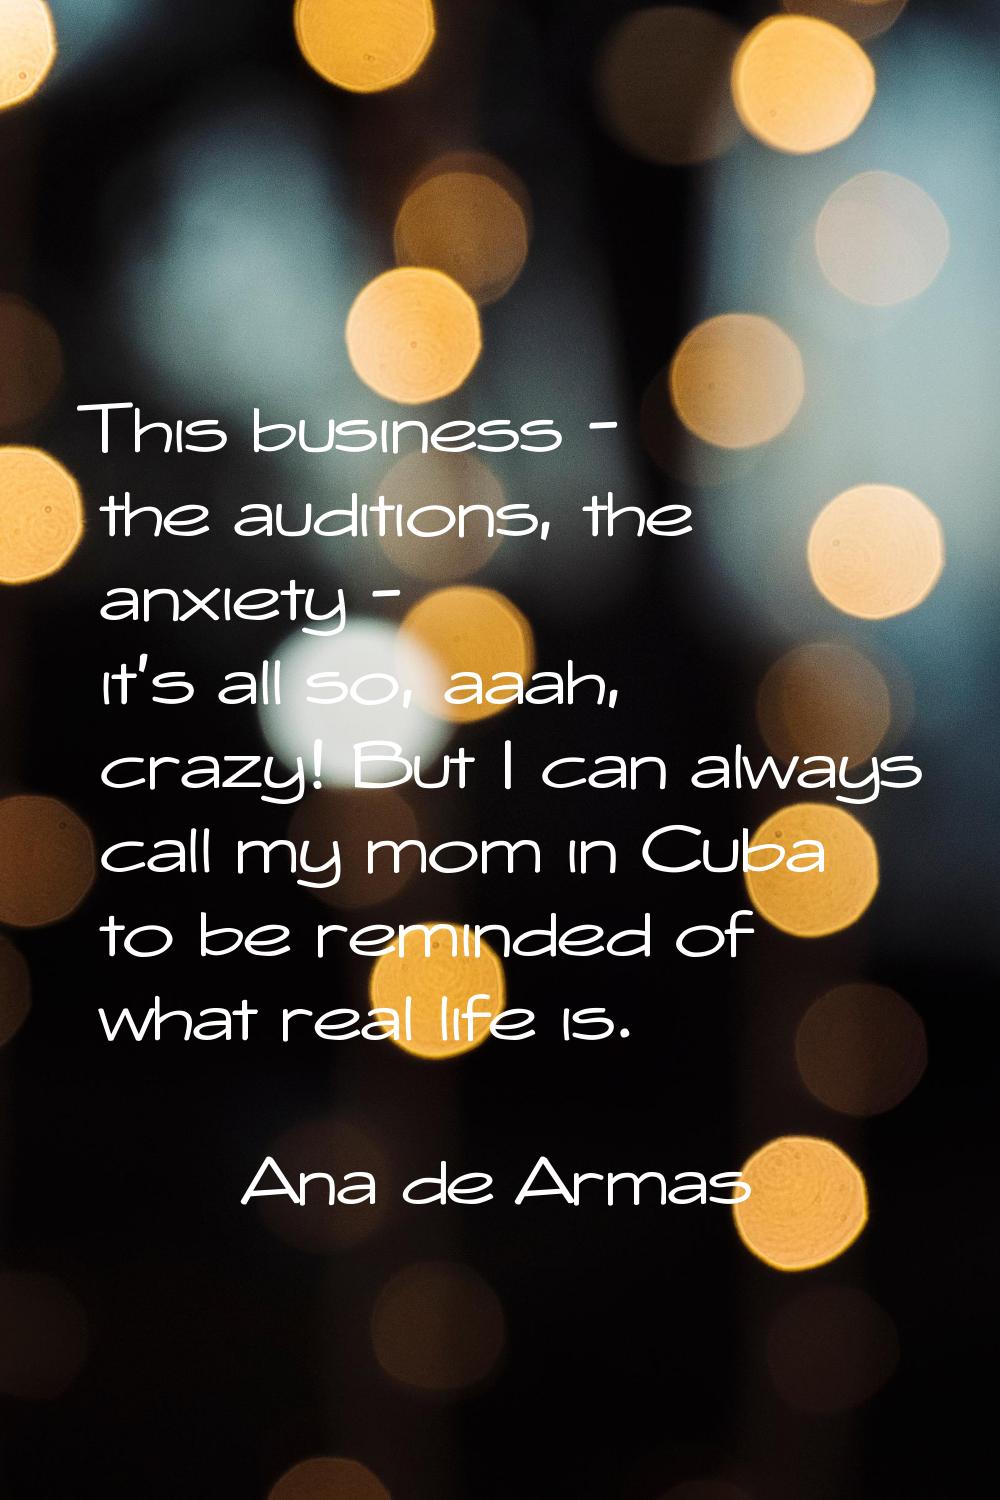 This business - the auditions, the anxiety - it's all so, aaah, crazy! But I can always call my mom